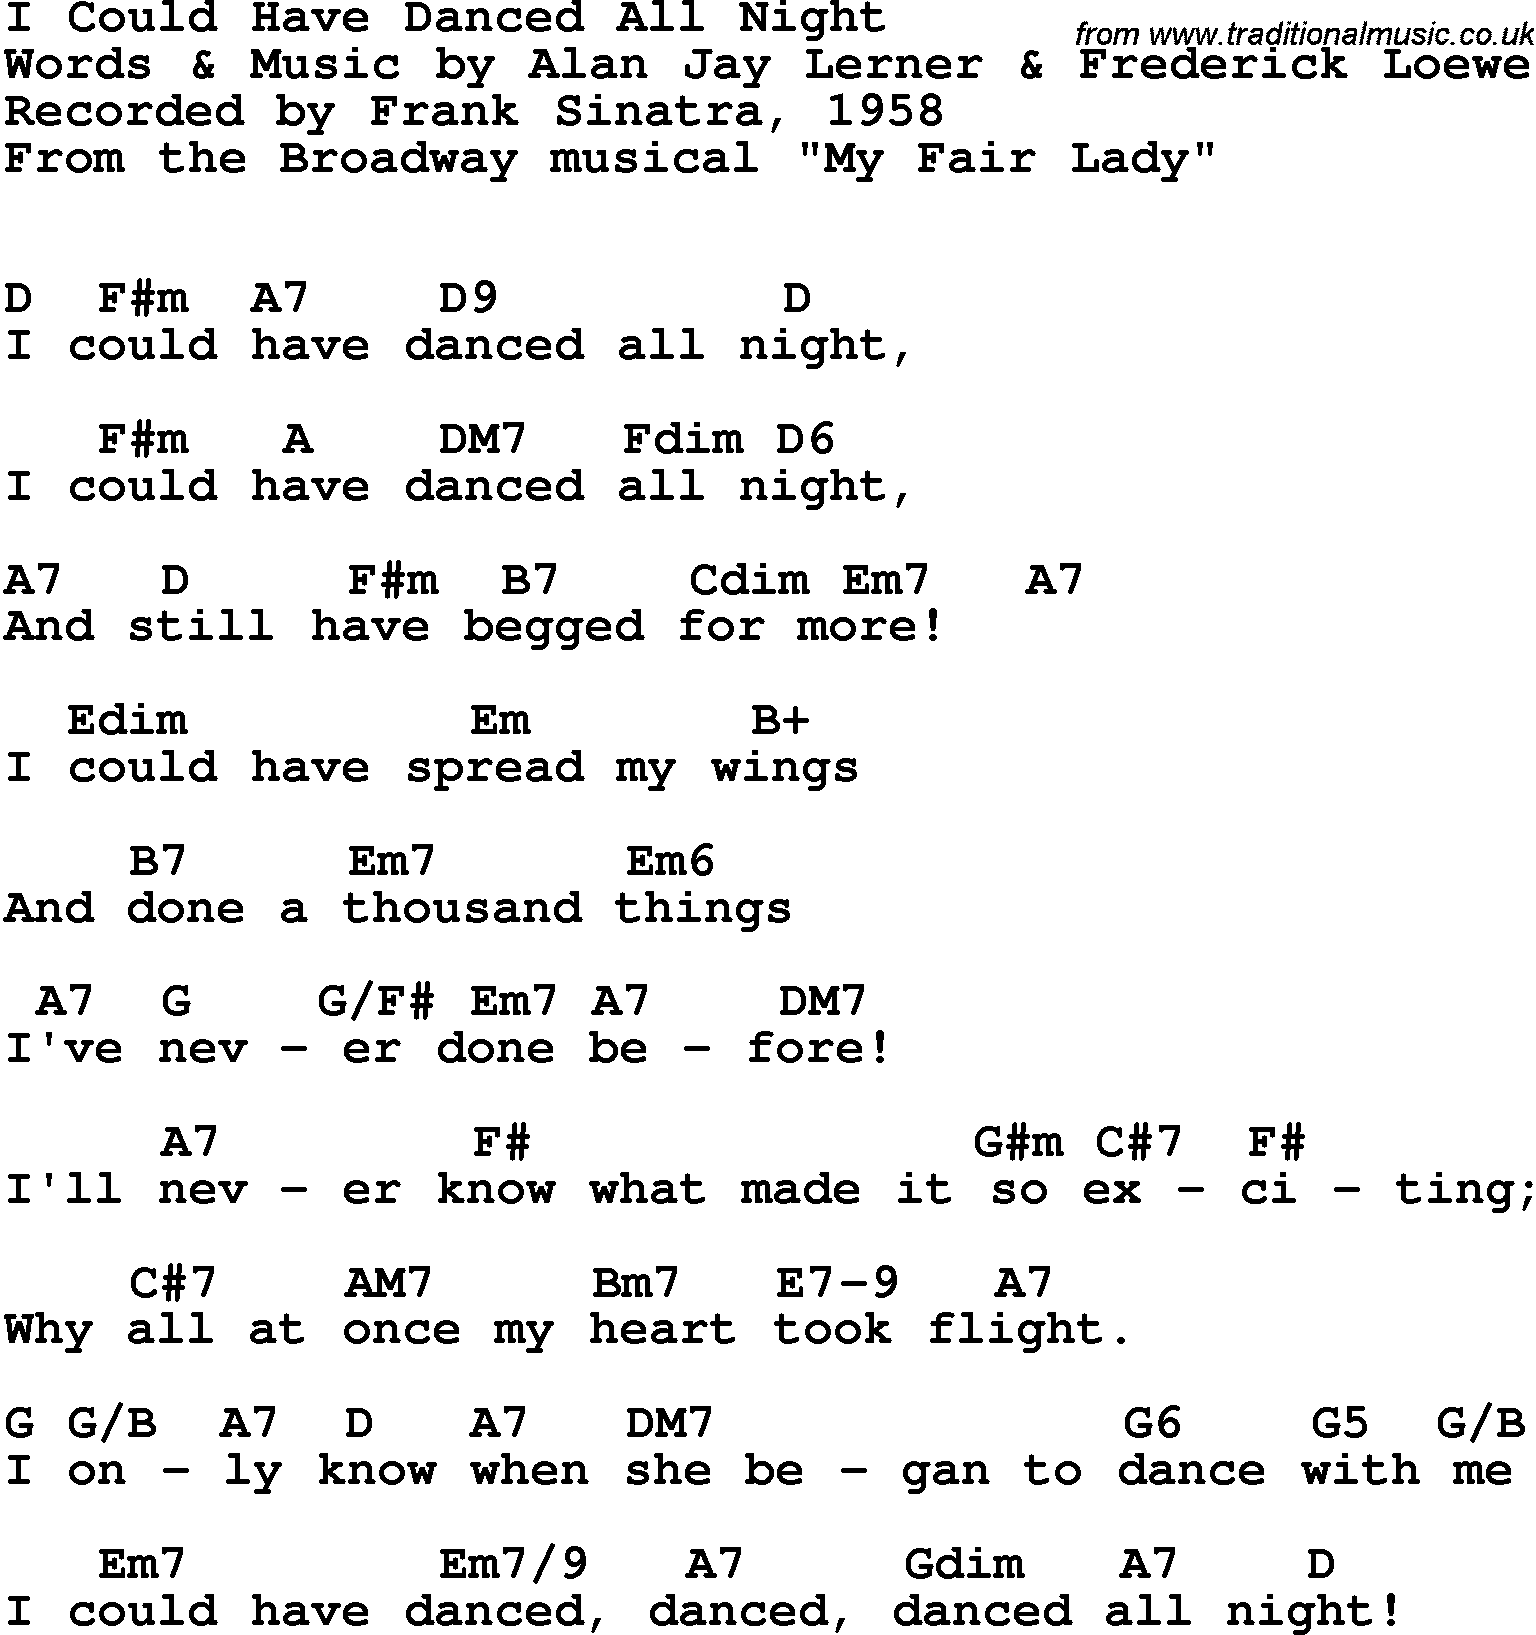 Song Lyrics with guitar chords for I Could Have Danced All Night - Frank Sinatra, 1958